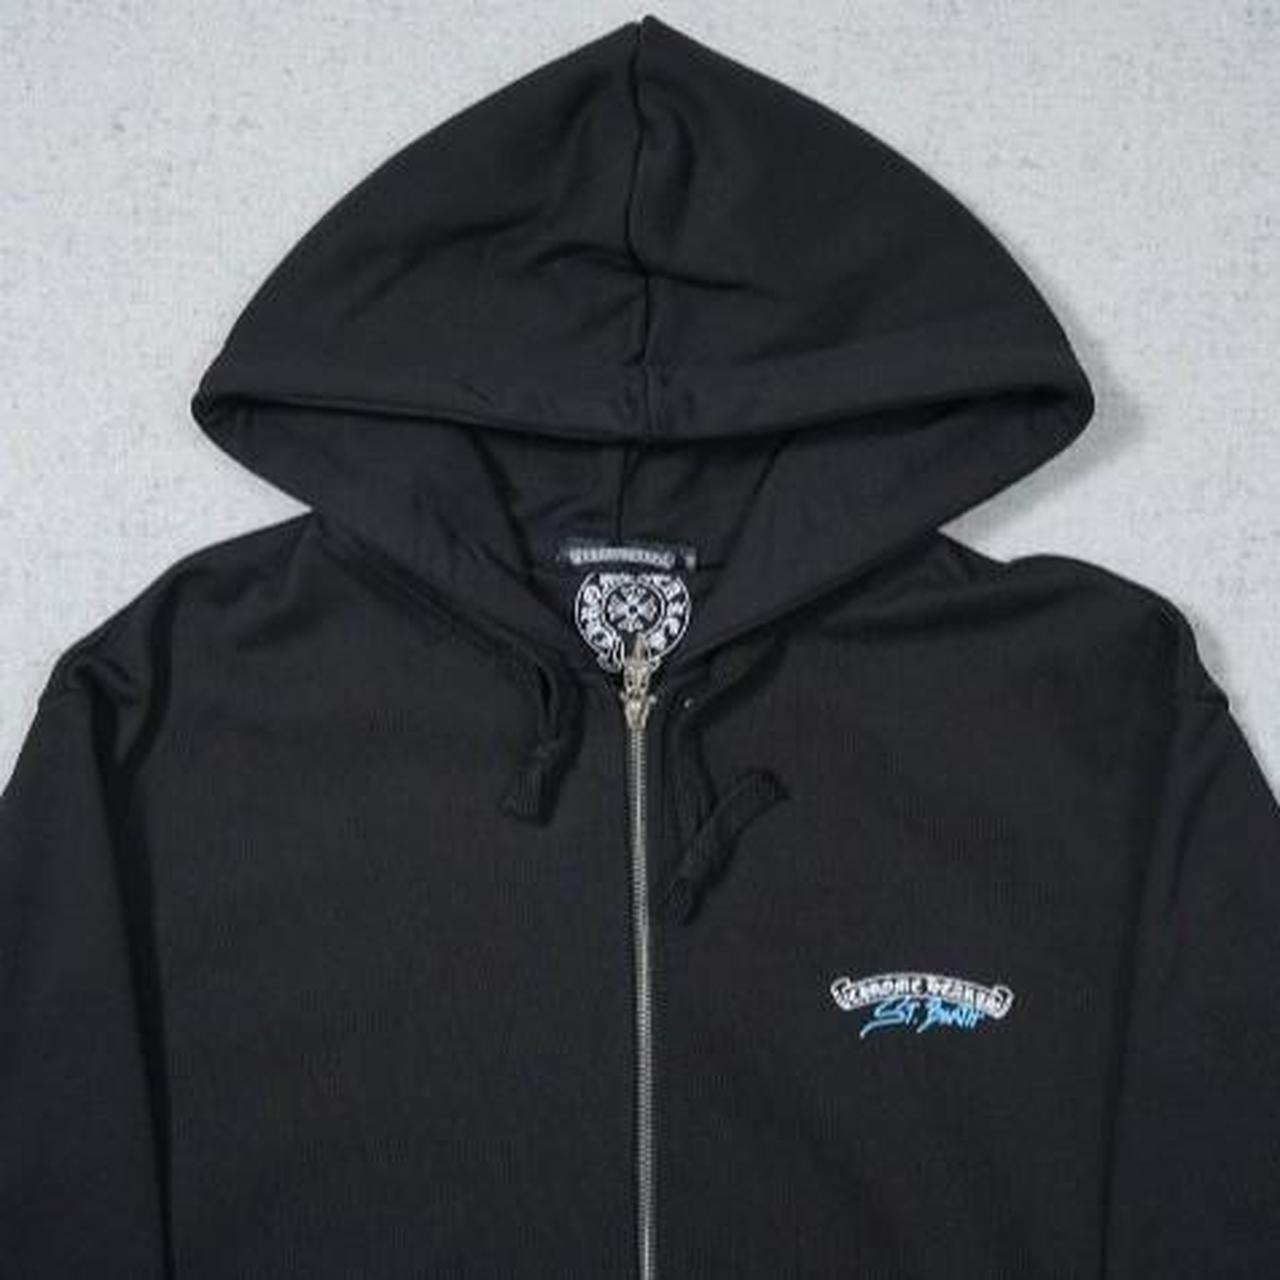 Chrome Hearts St. Barth Exclusive Zip Up Hoodie.